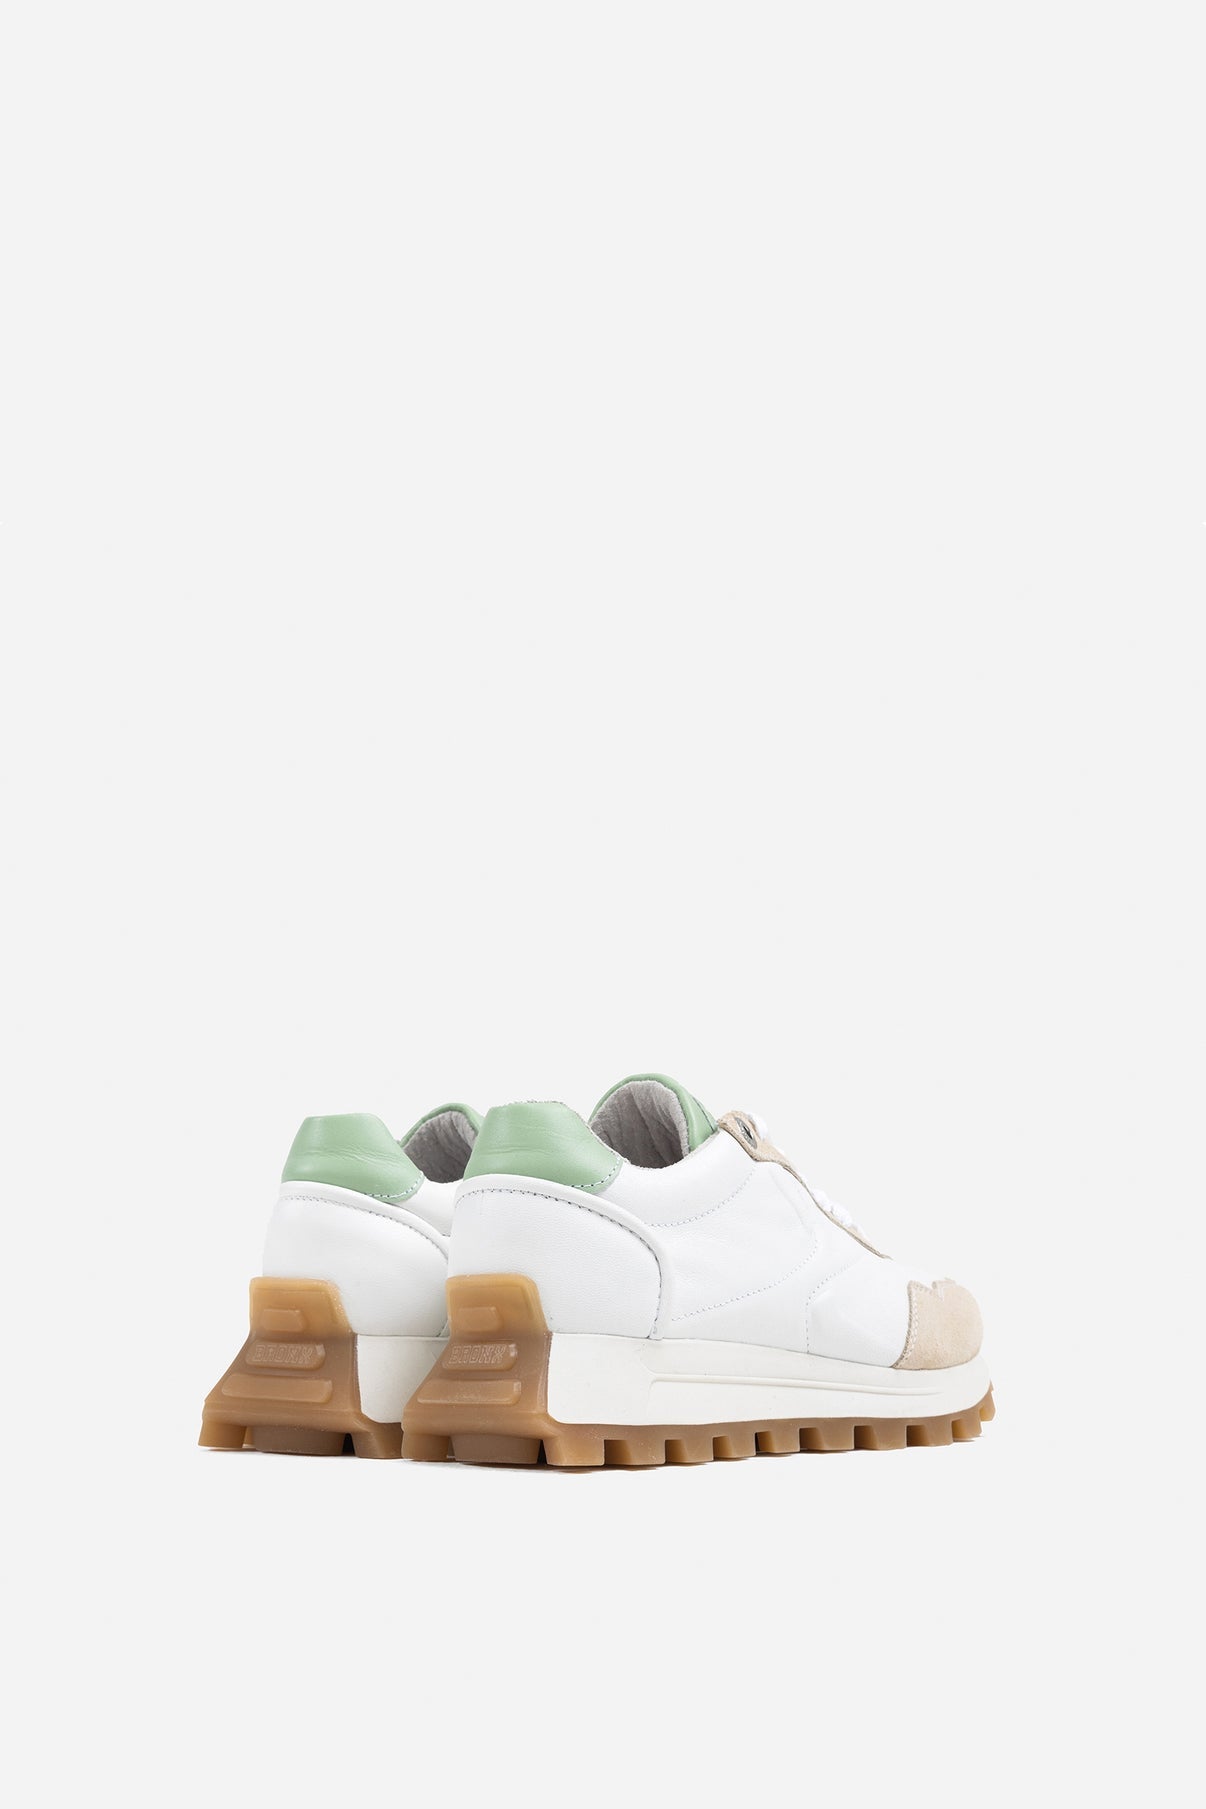 Avery Off White Pastel Green Chunky Sneakers 66454-BA-3684 - 4